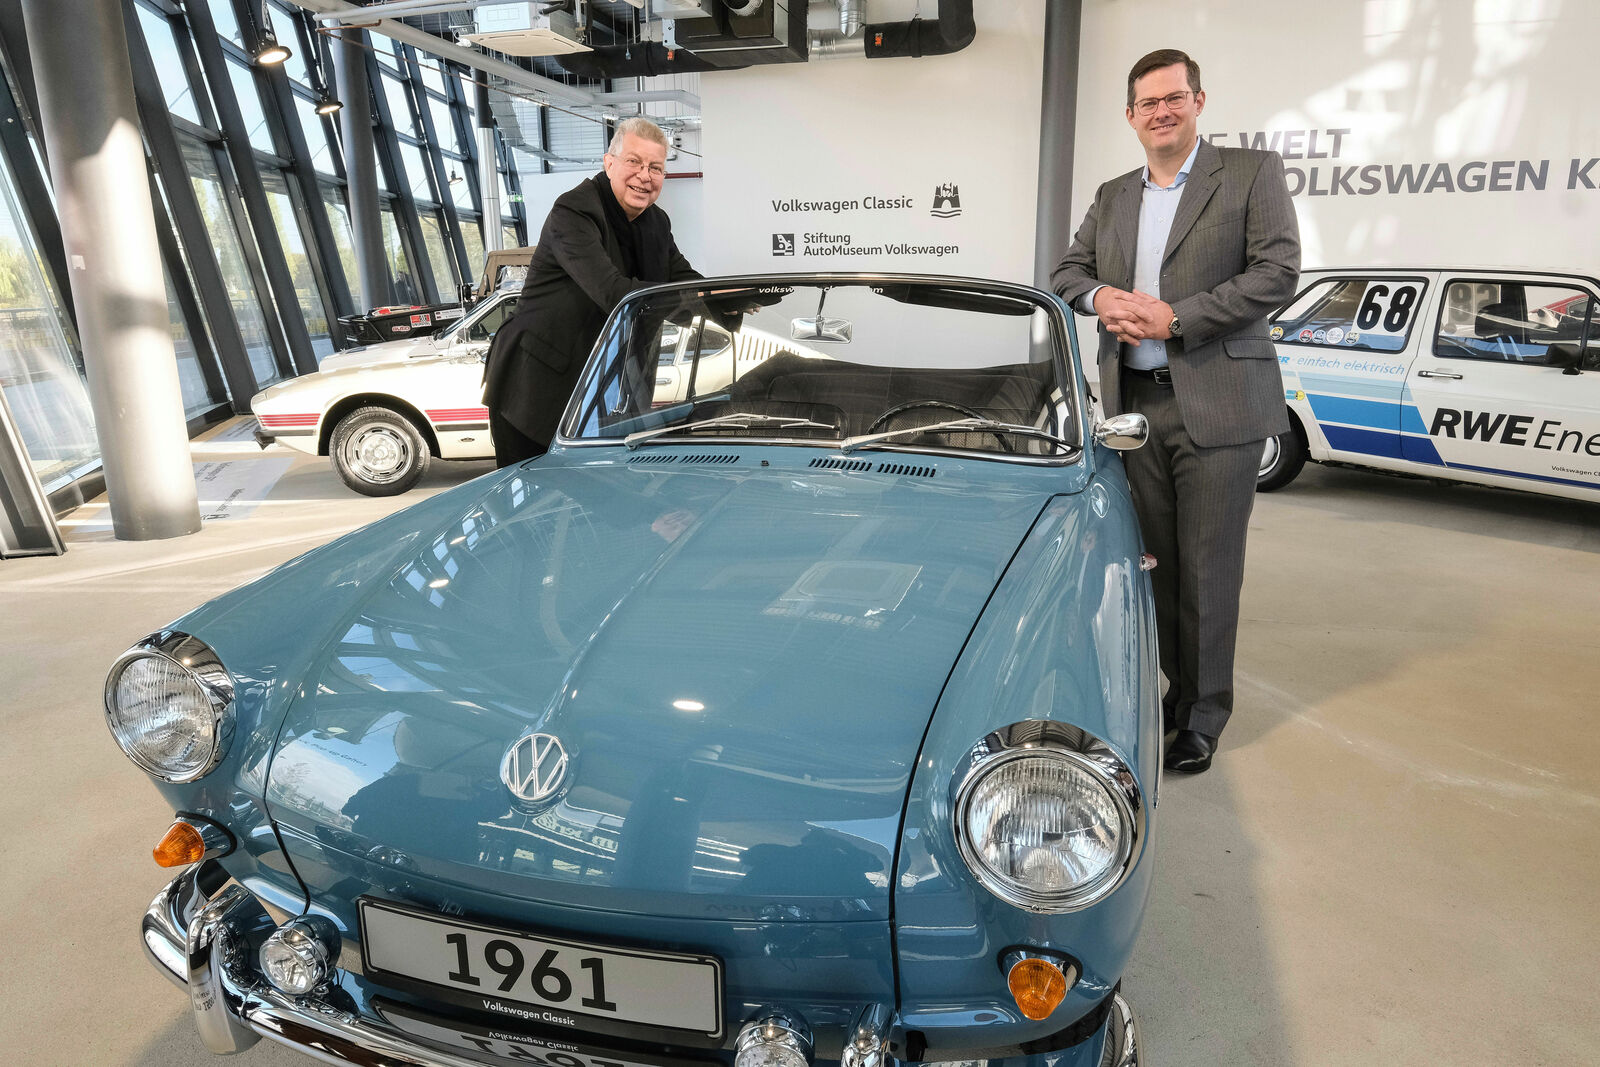 Exhibition “The world of Volkswagen classics” to open at the Designer Outlets Wolfsburg